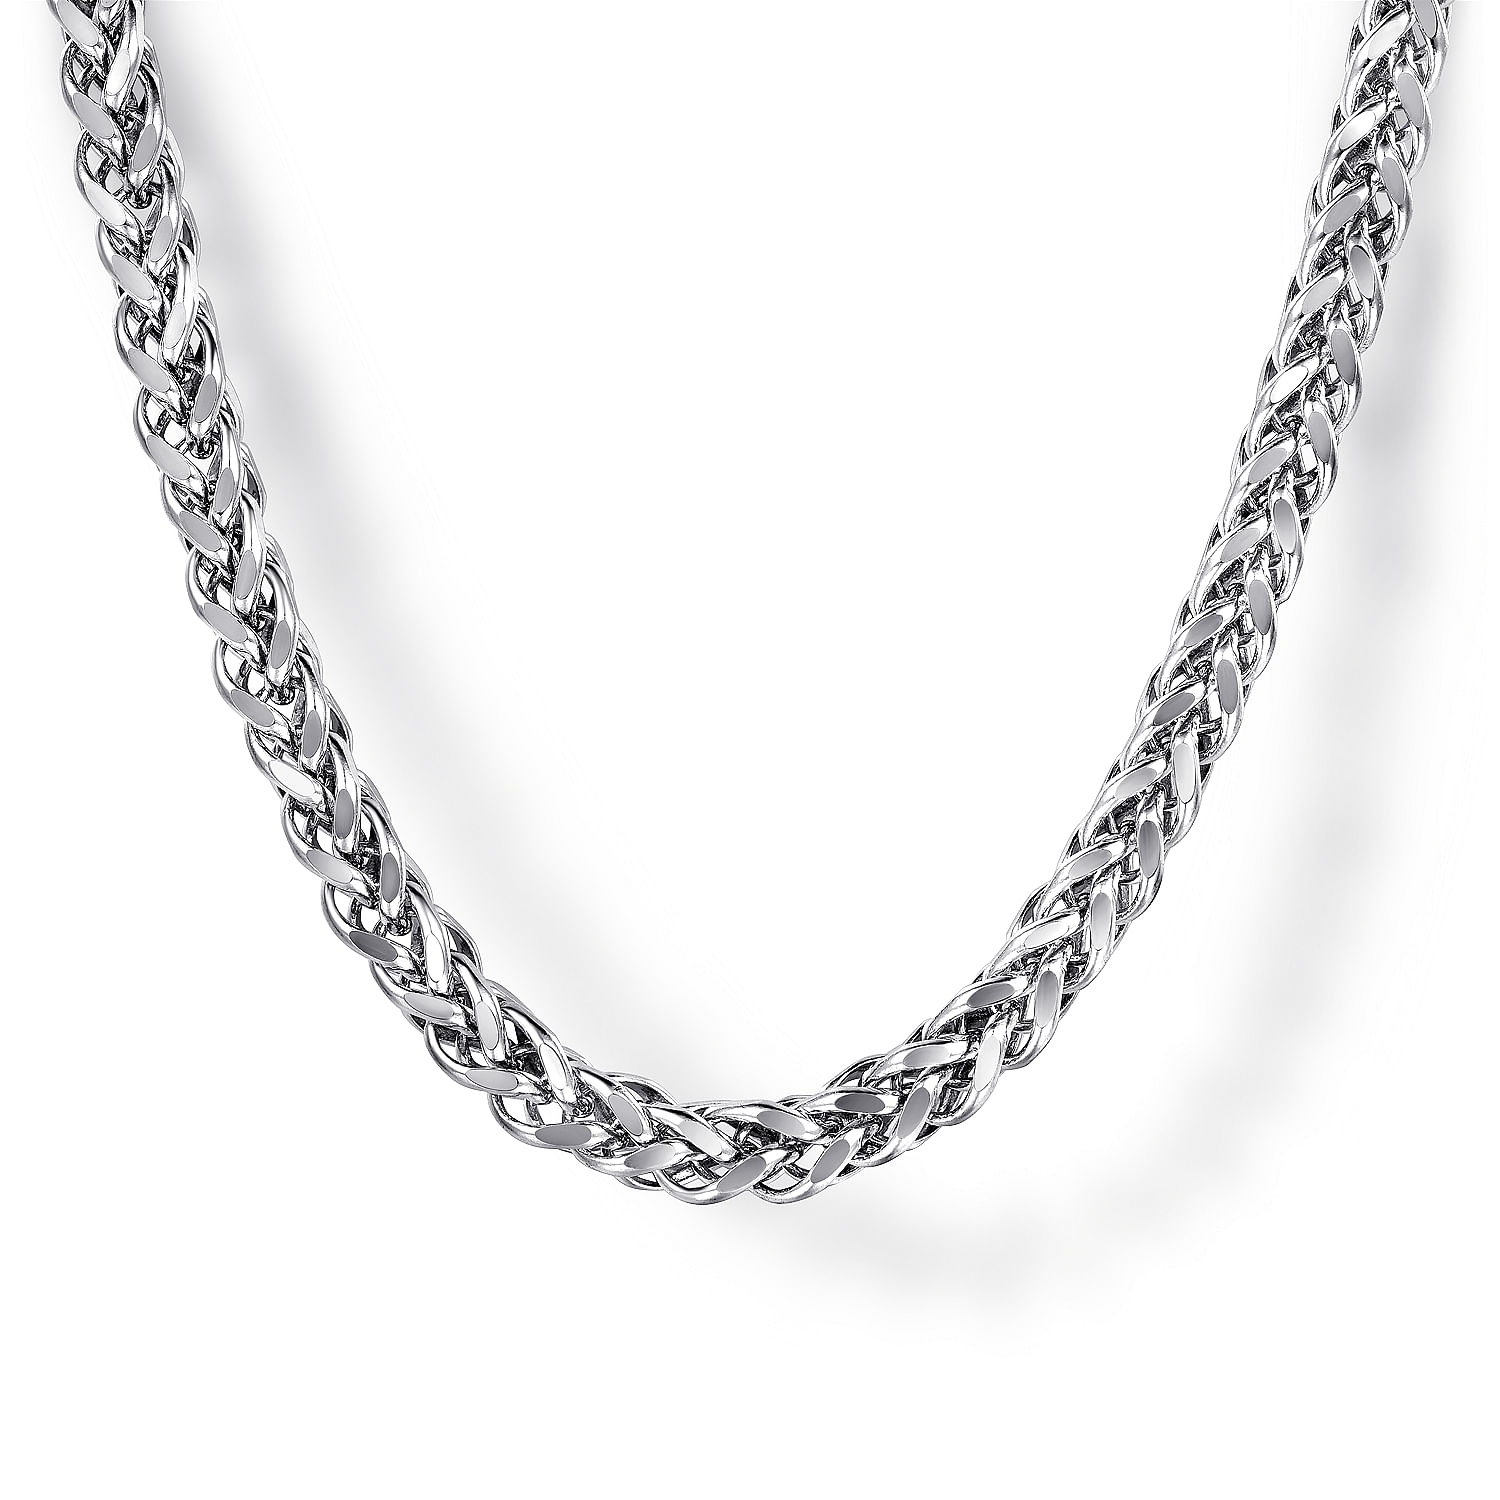 22 Inch 925 Sterling Silver Men's Wheat Chain Necklace | Shop 925